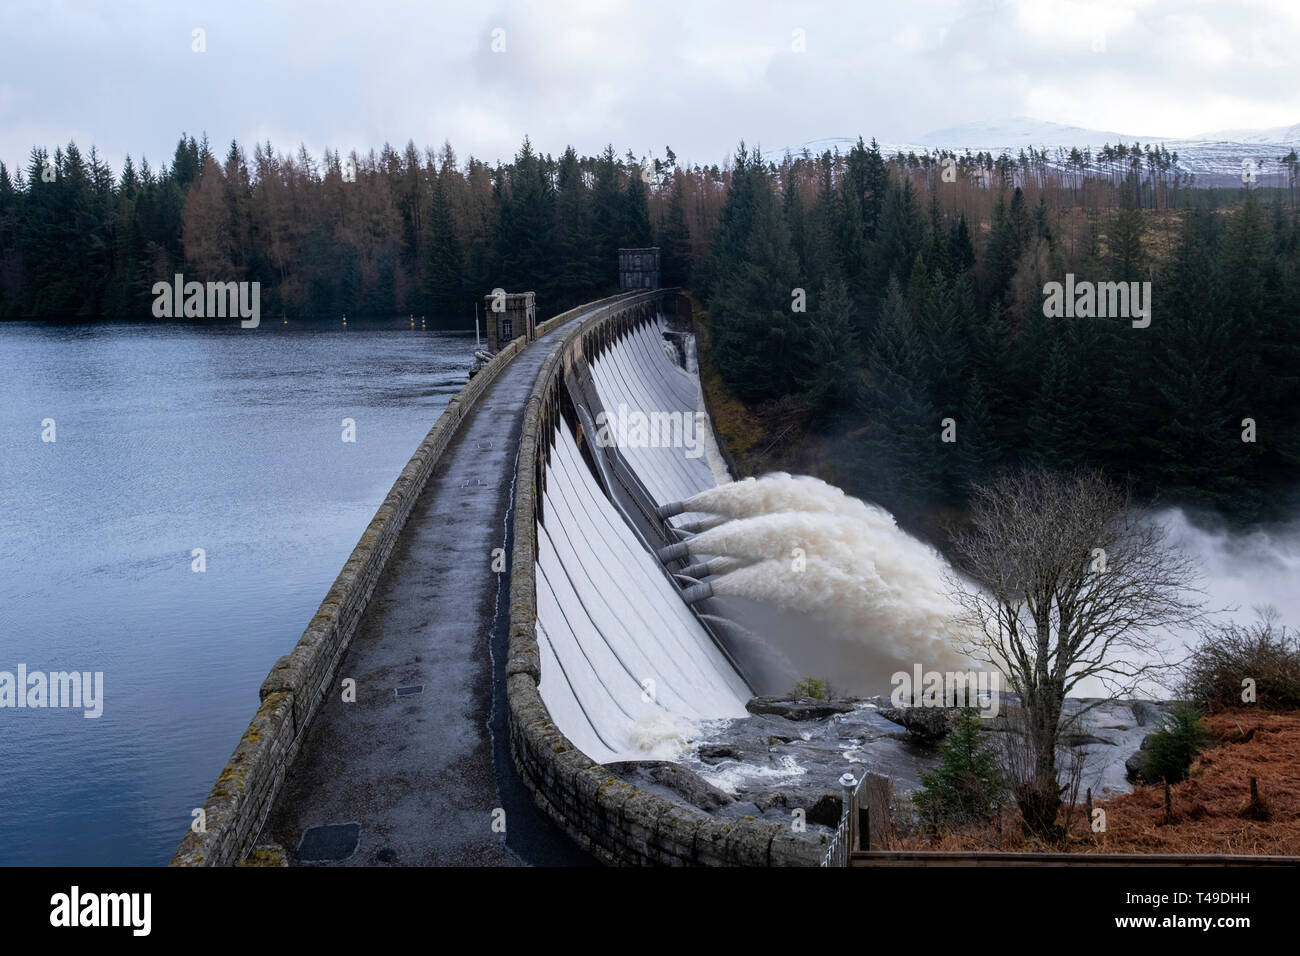 Loch Laggan hydroelectric dam releasing water to produce electricity, Highlands, Scotland, UK, Europe Stock Photo